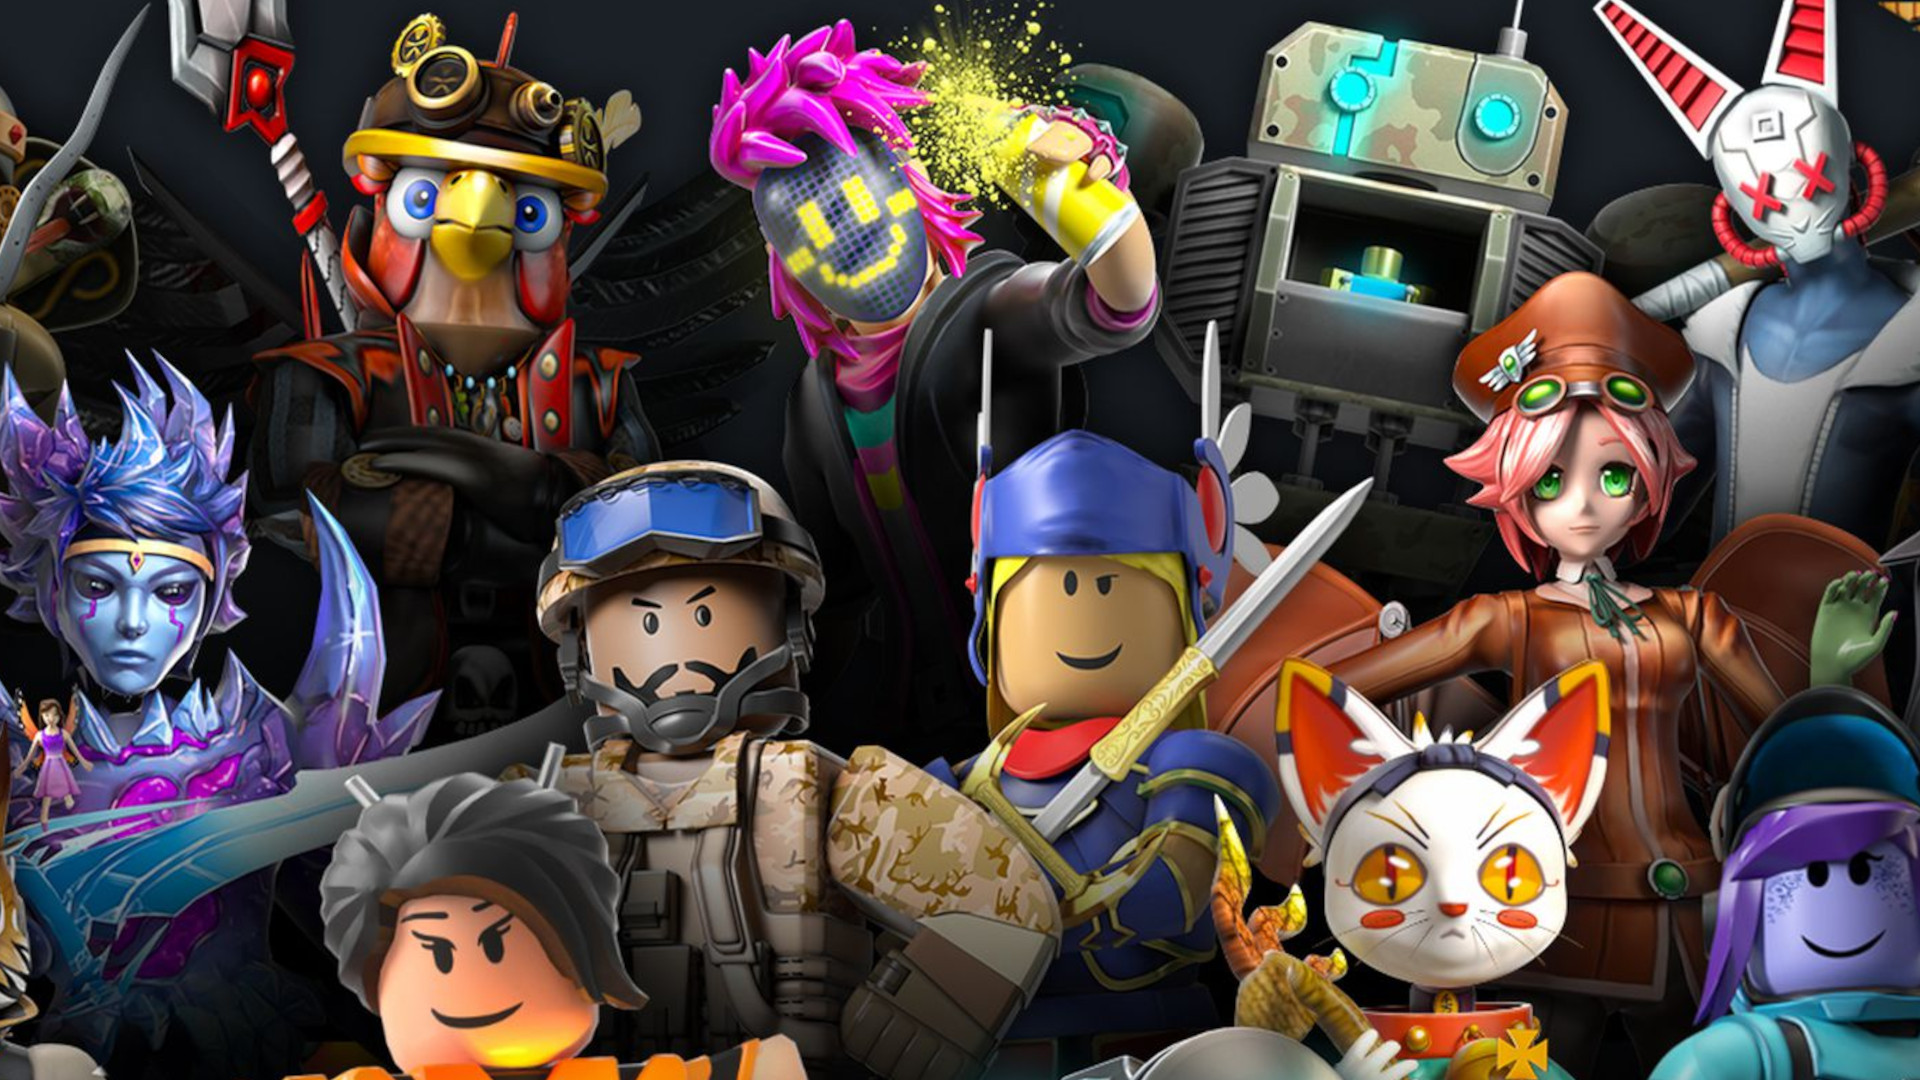 Roblox Fling Things and People Codes (December 2023)